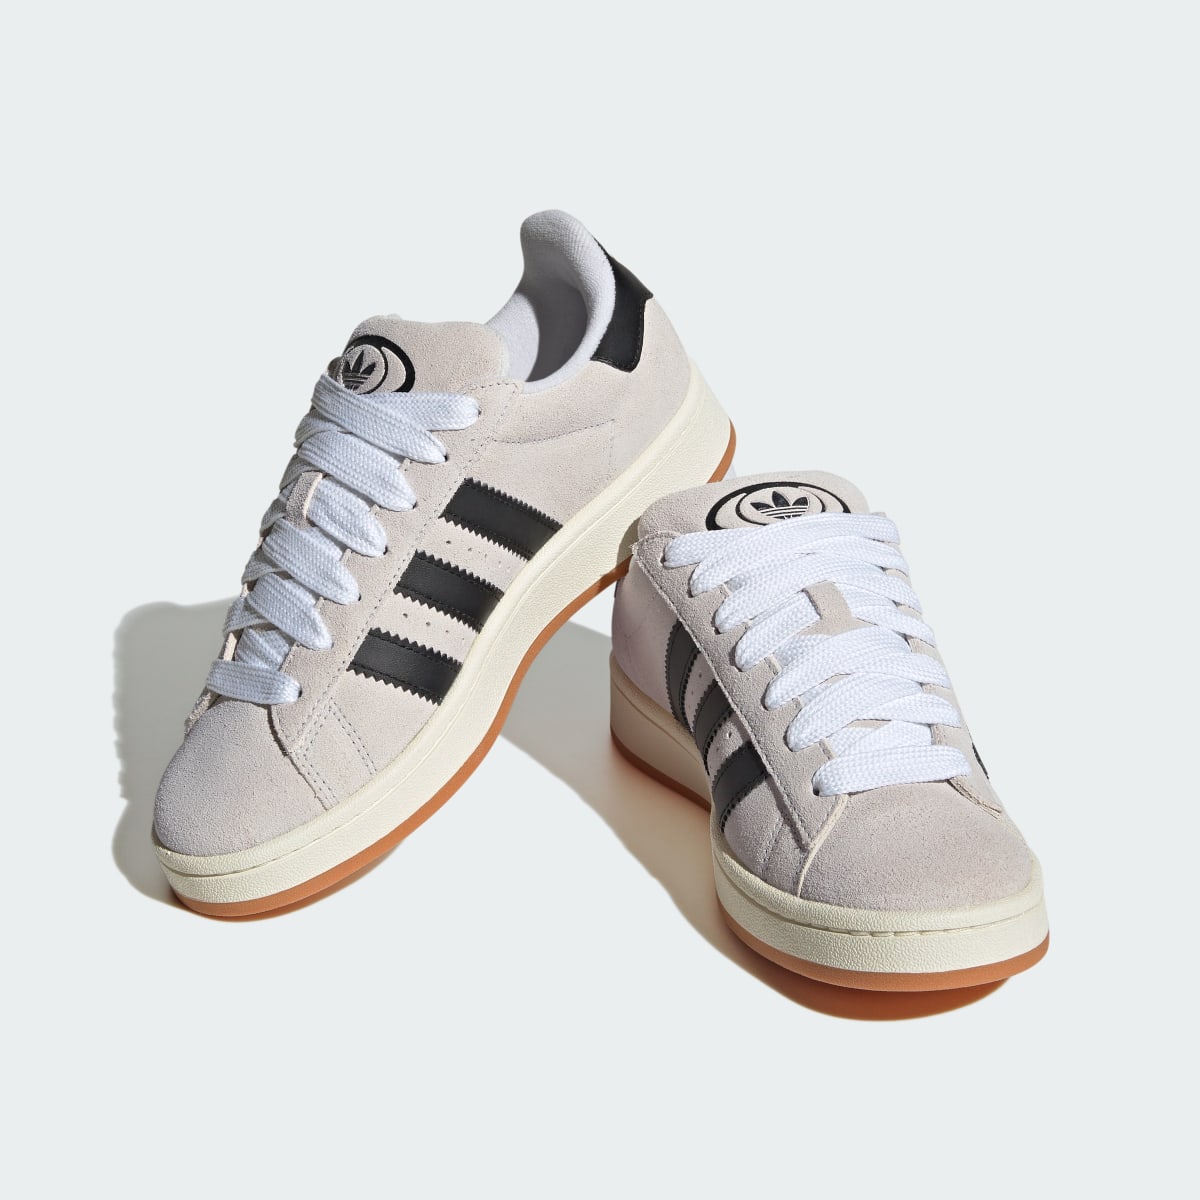 Adidas Campus 00s Shoes. 10